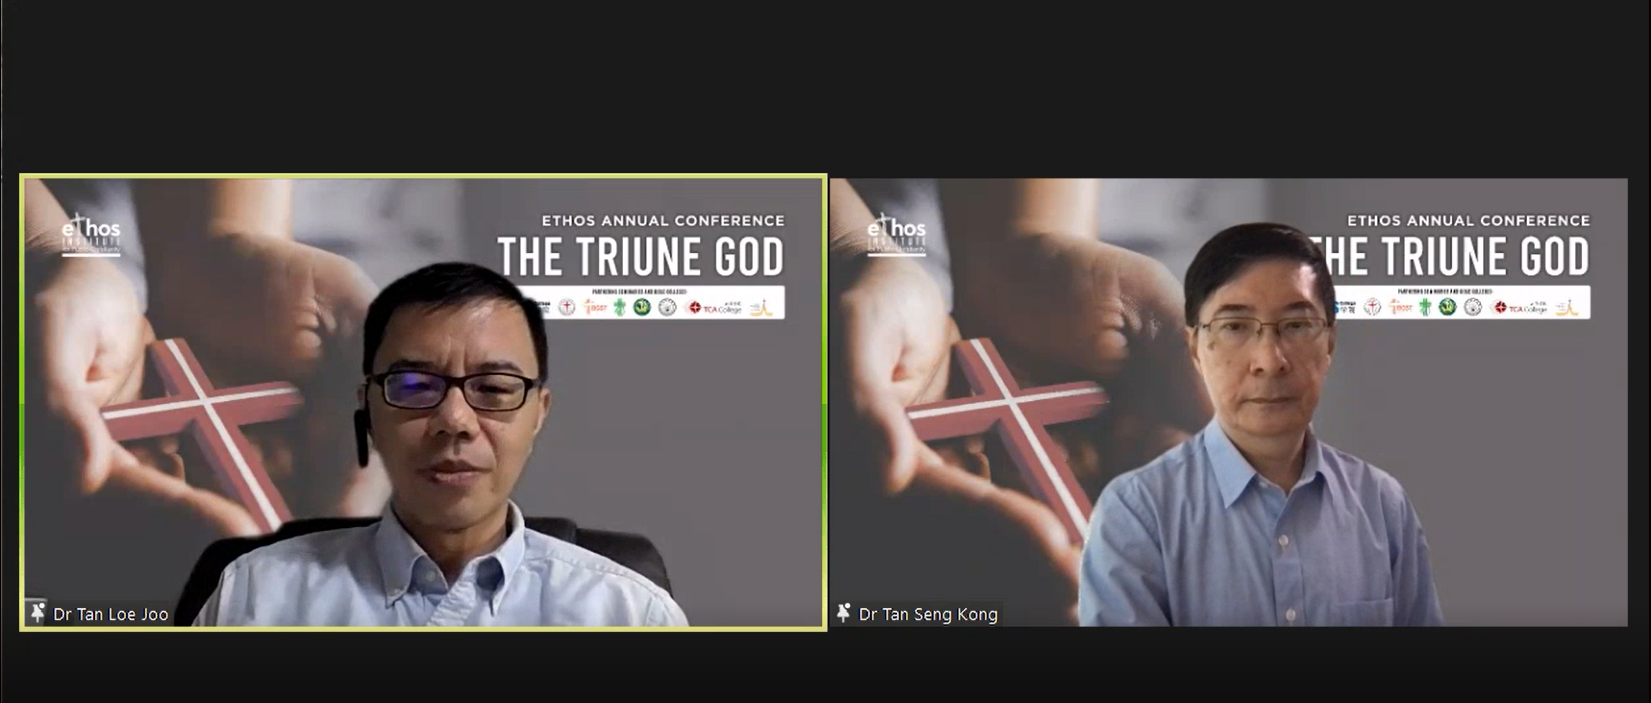 Moderator Dr Tan Loe Joo introduced Dr Tan Seng Kong to give a speech titled “Trinity in Early Christianity” in the Ethos' annual virtual conference “The Triune God" on September 25, 2021.